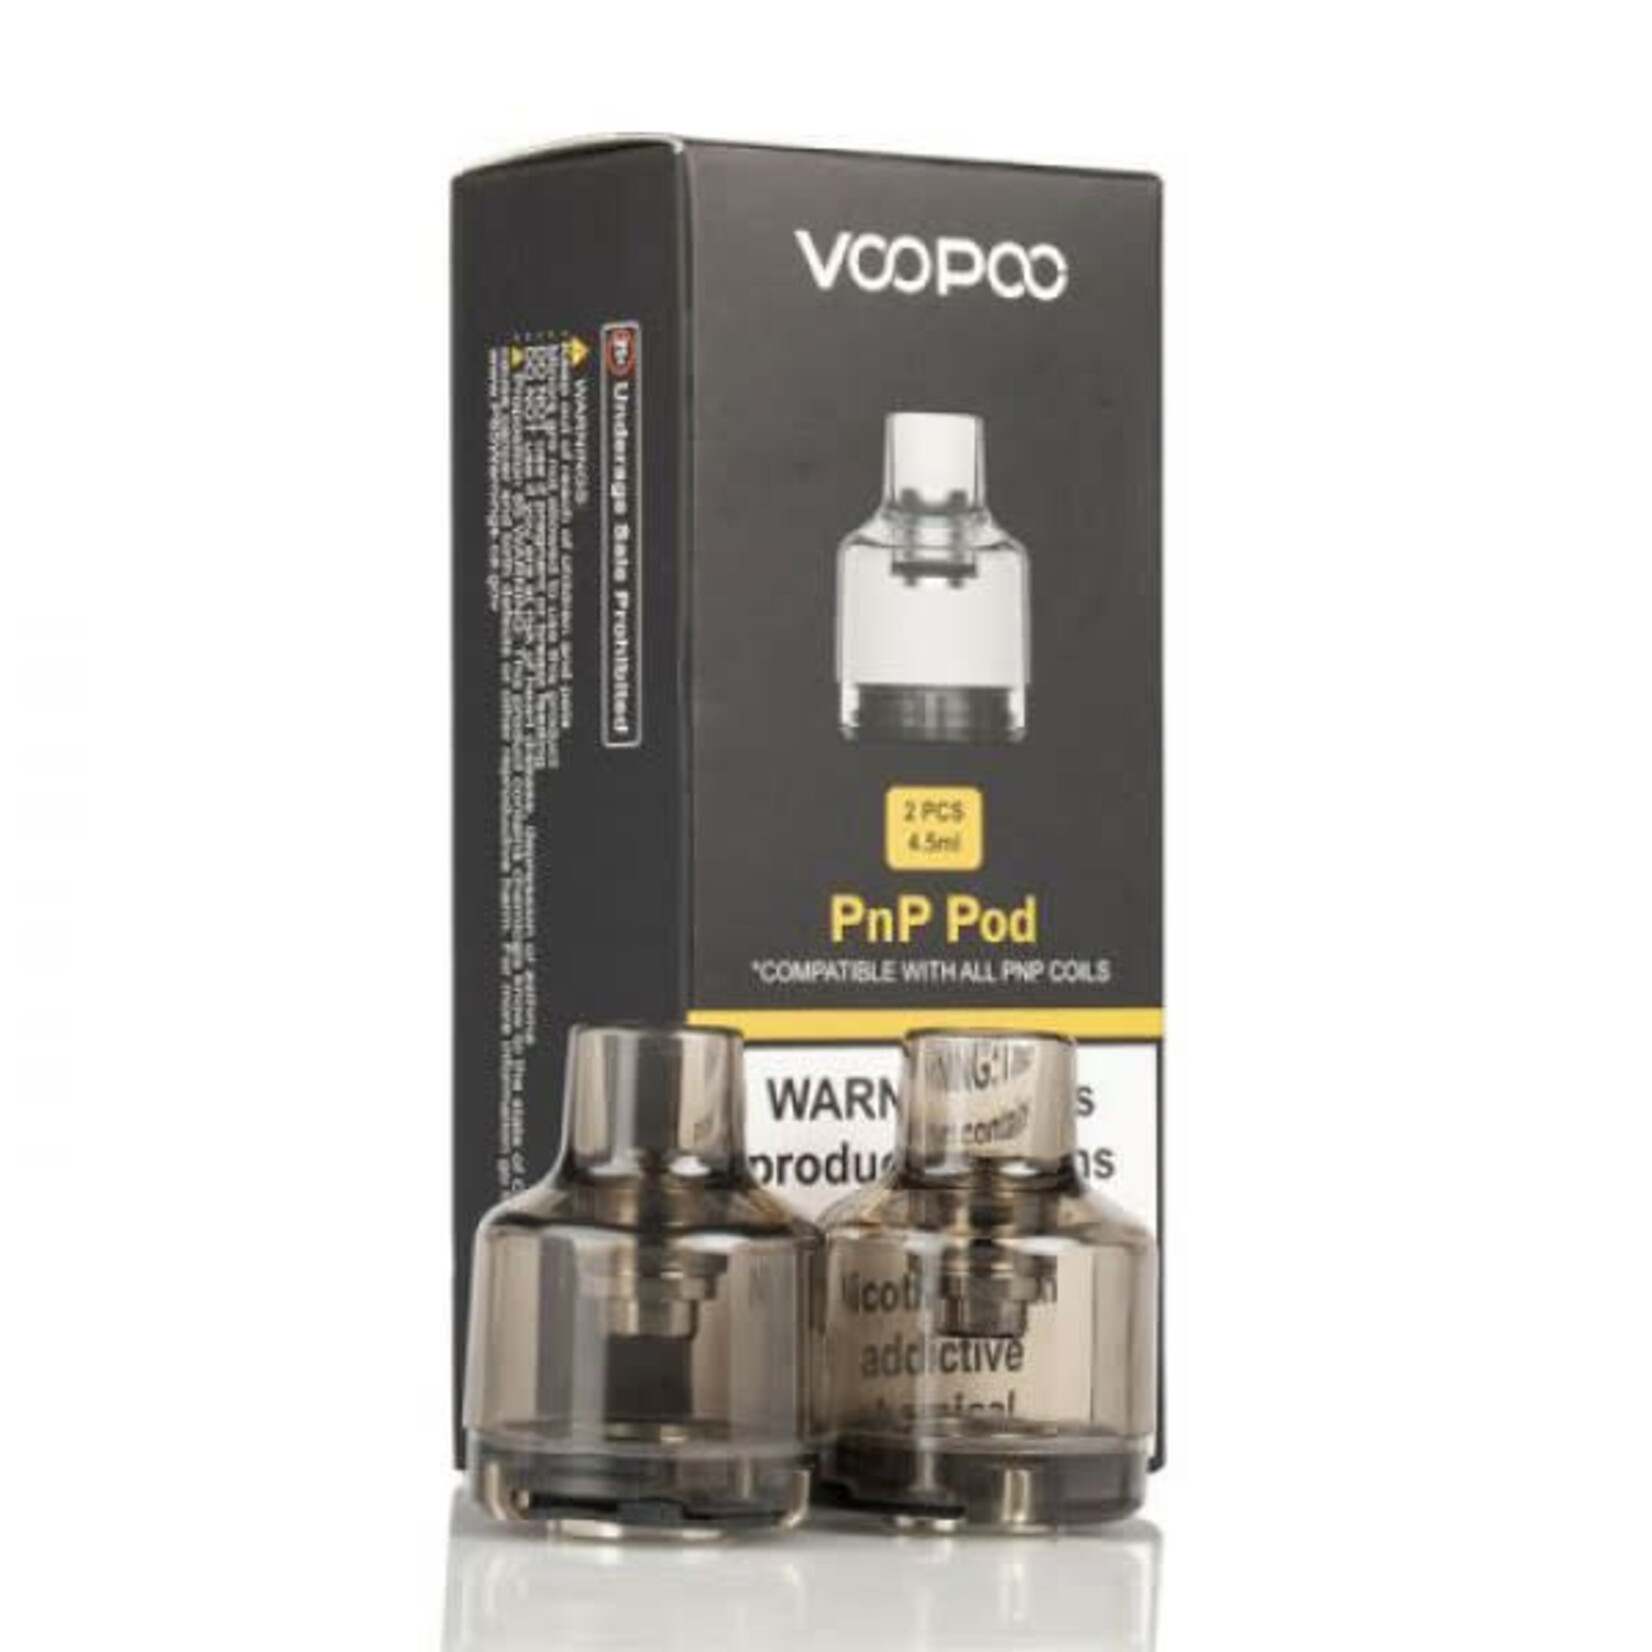 Voopoo PNP OG Replacement Tank (Box of 2)